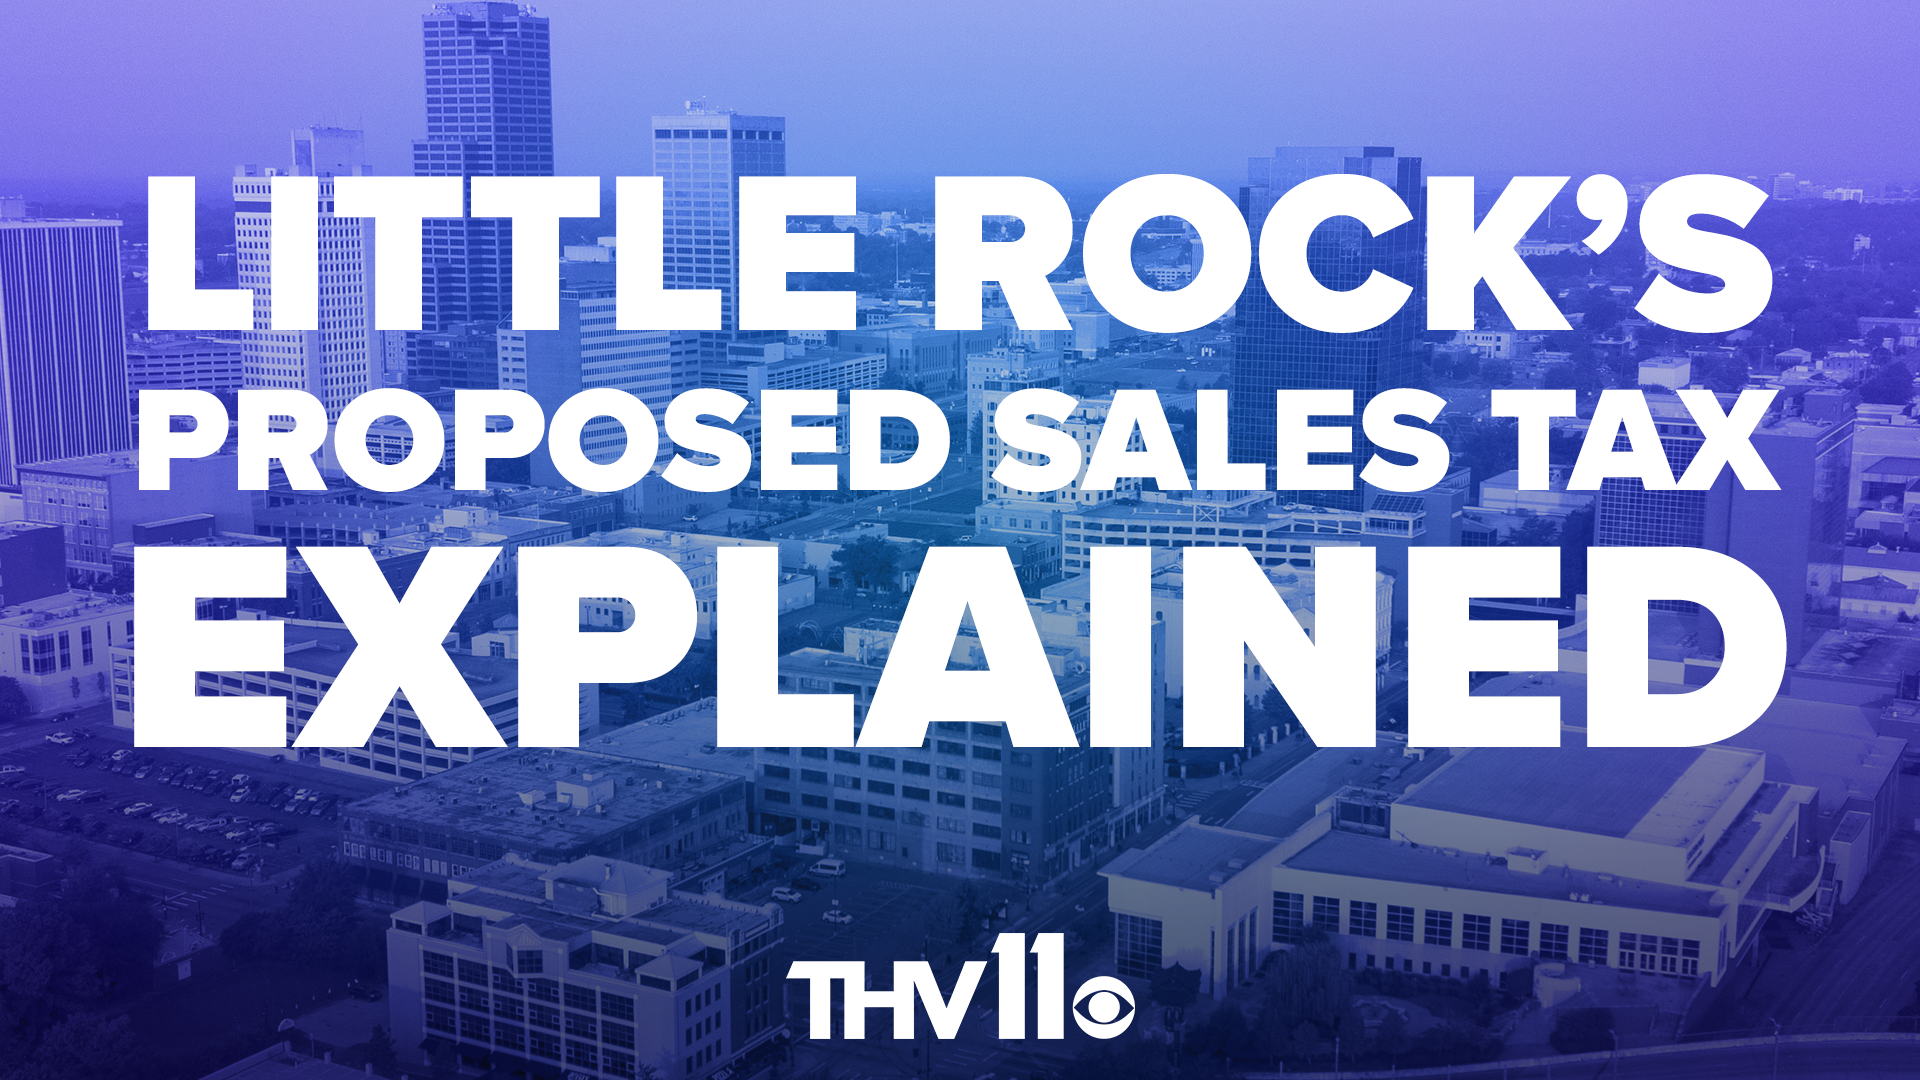 Little Rock voters will decide on Sept. 14 on whether they want a new sales tax. We've broken down what it means for the city's future who it impacts.